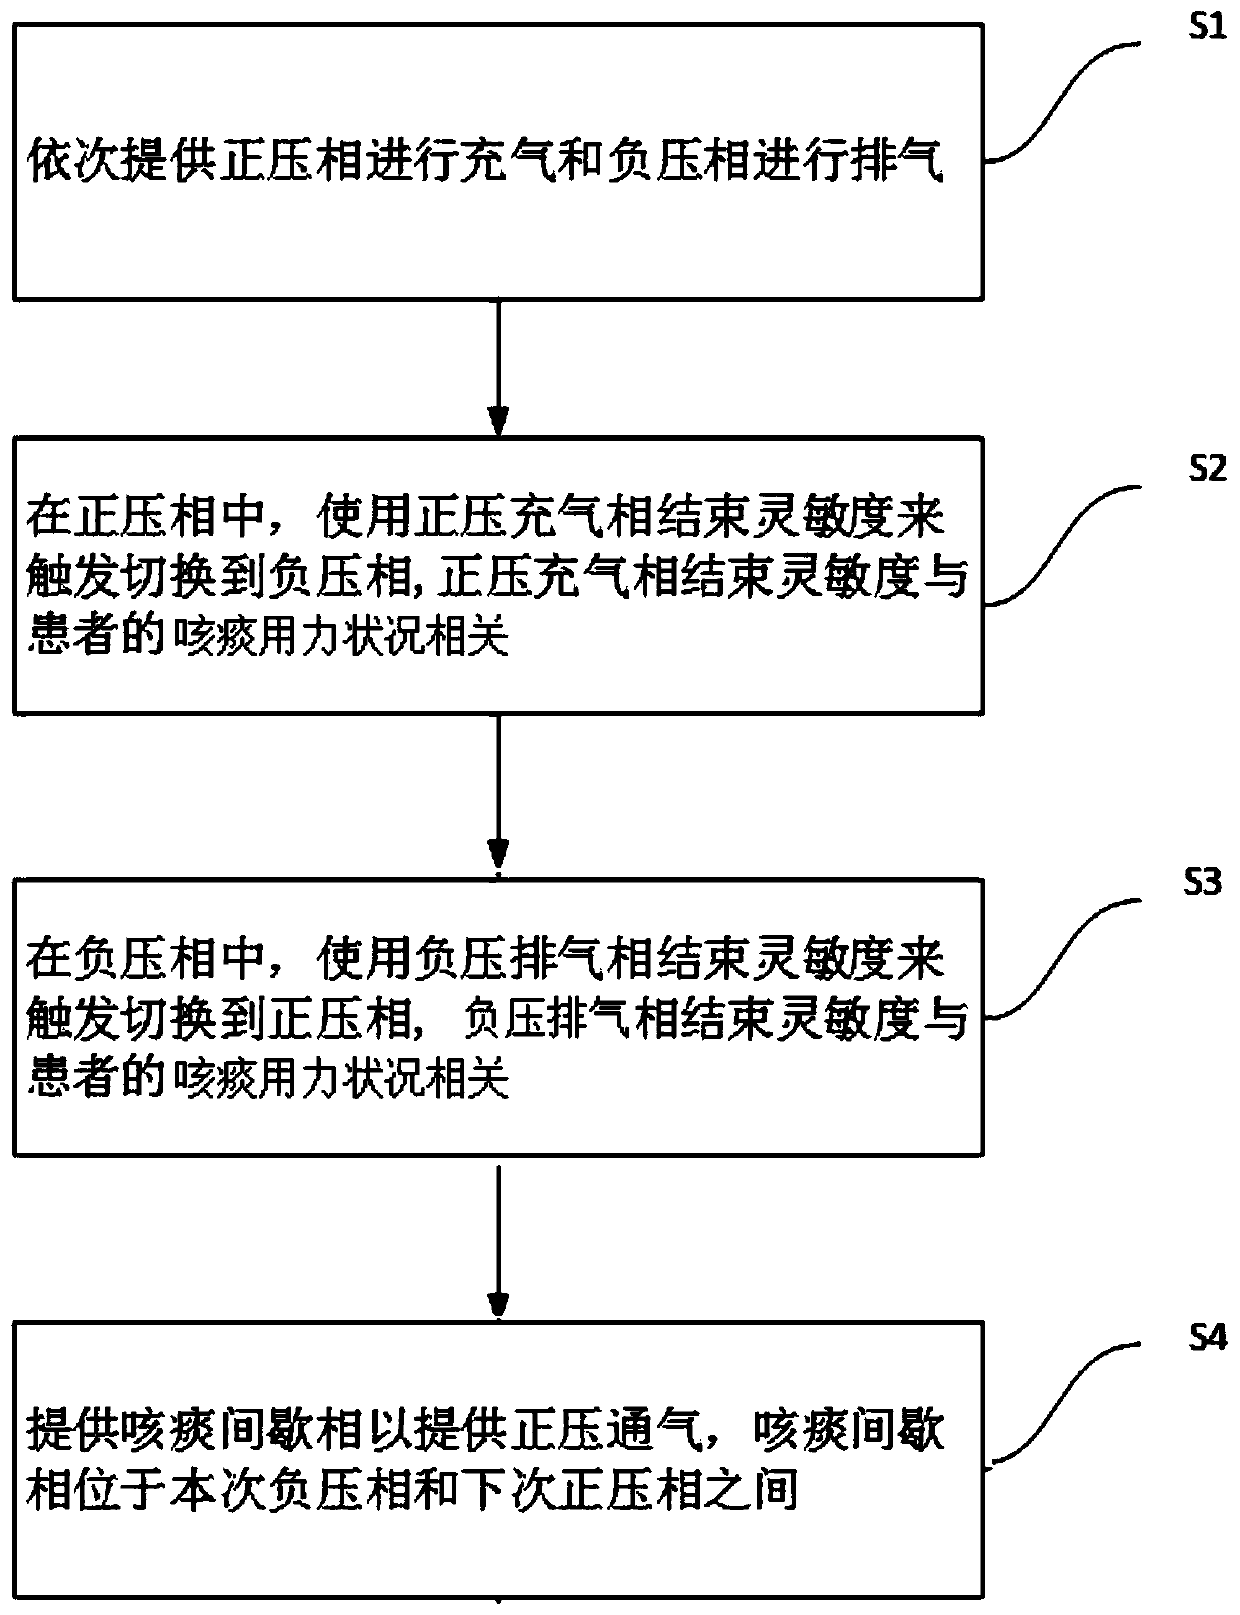 Synchronous automatic expectoration method and system